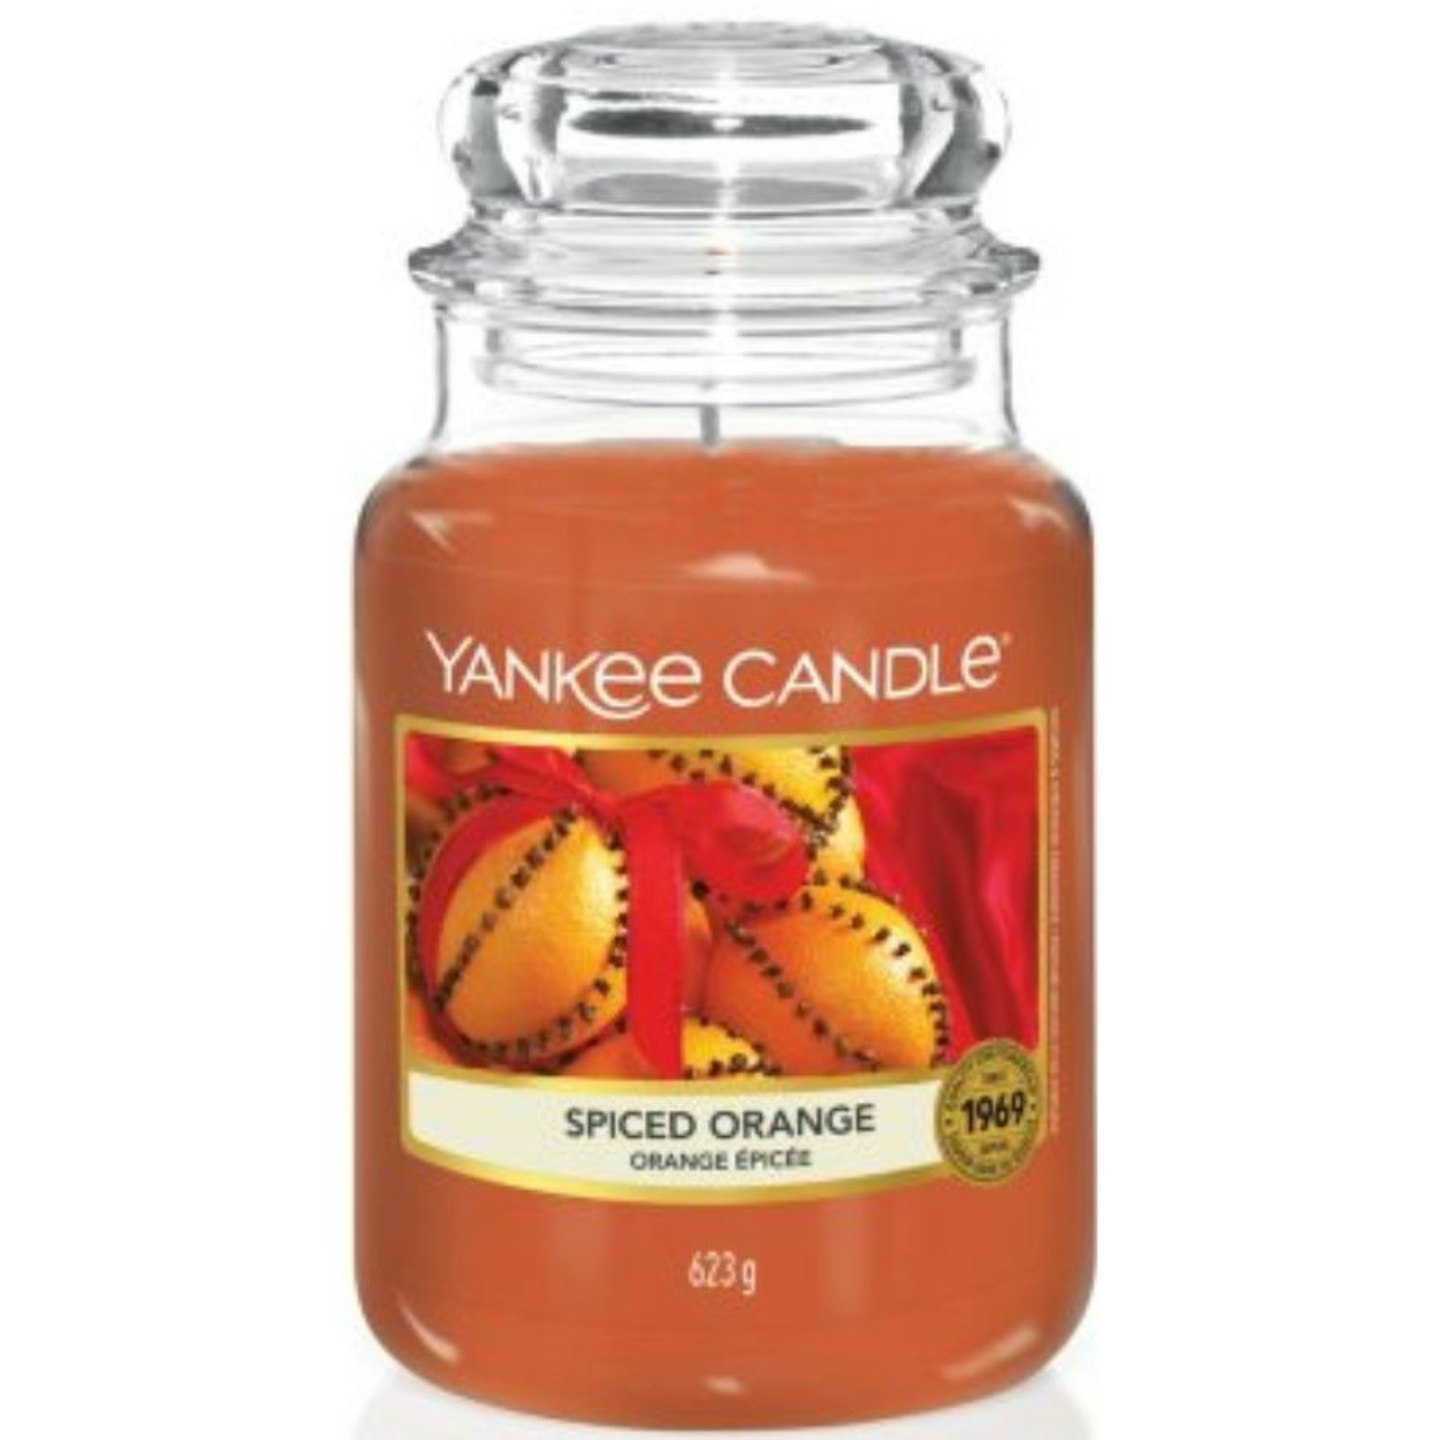 Fall Yankee Candle Sale: Here's How to Score the Perfect Autumnal Scent